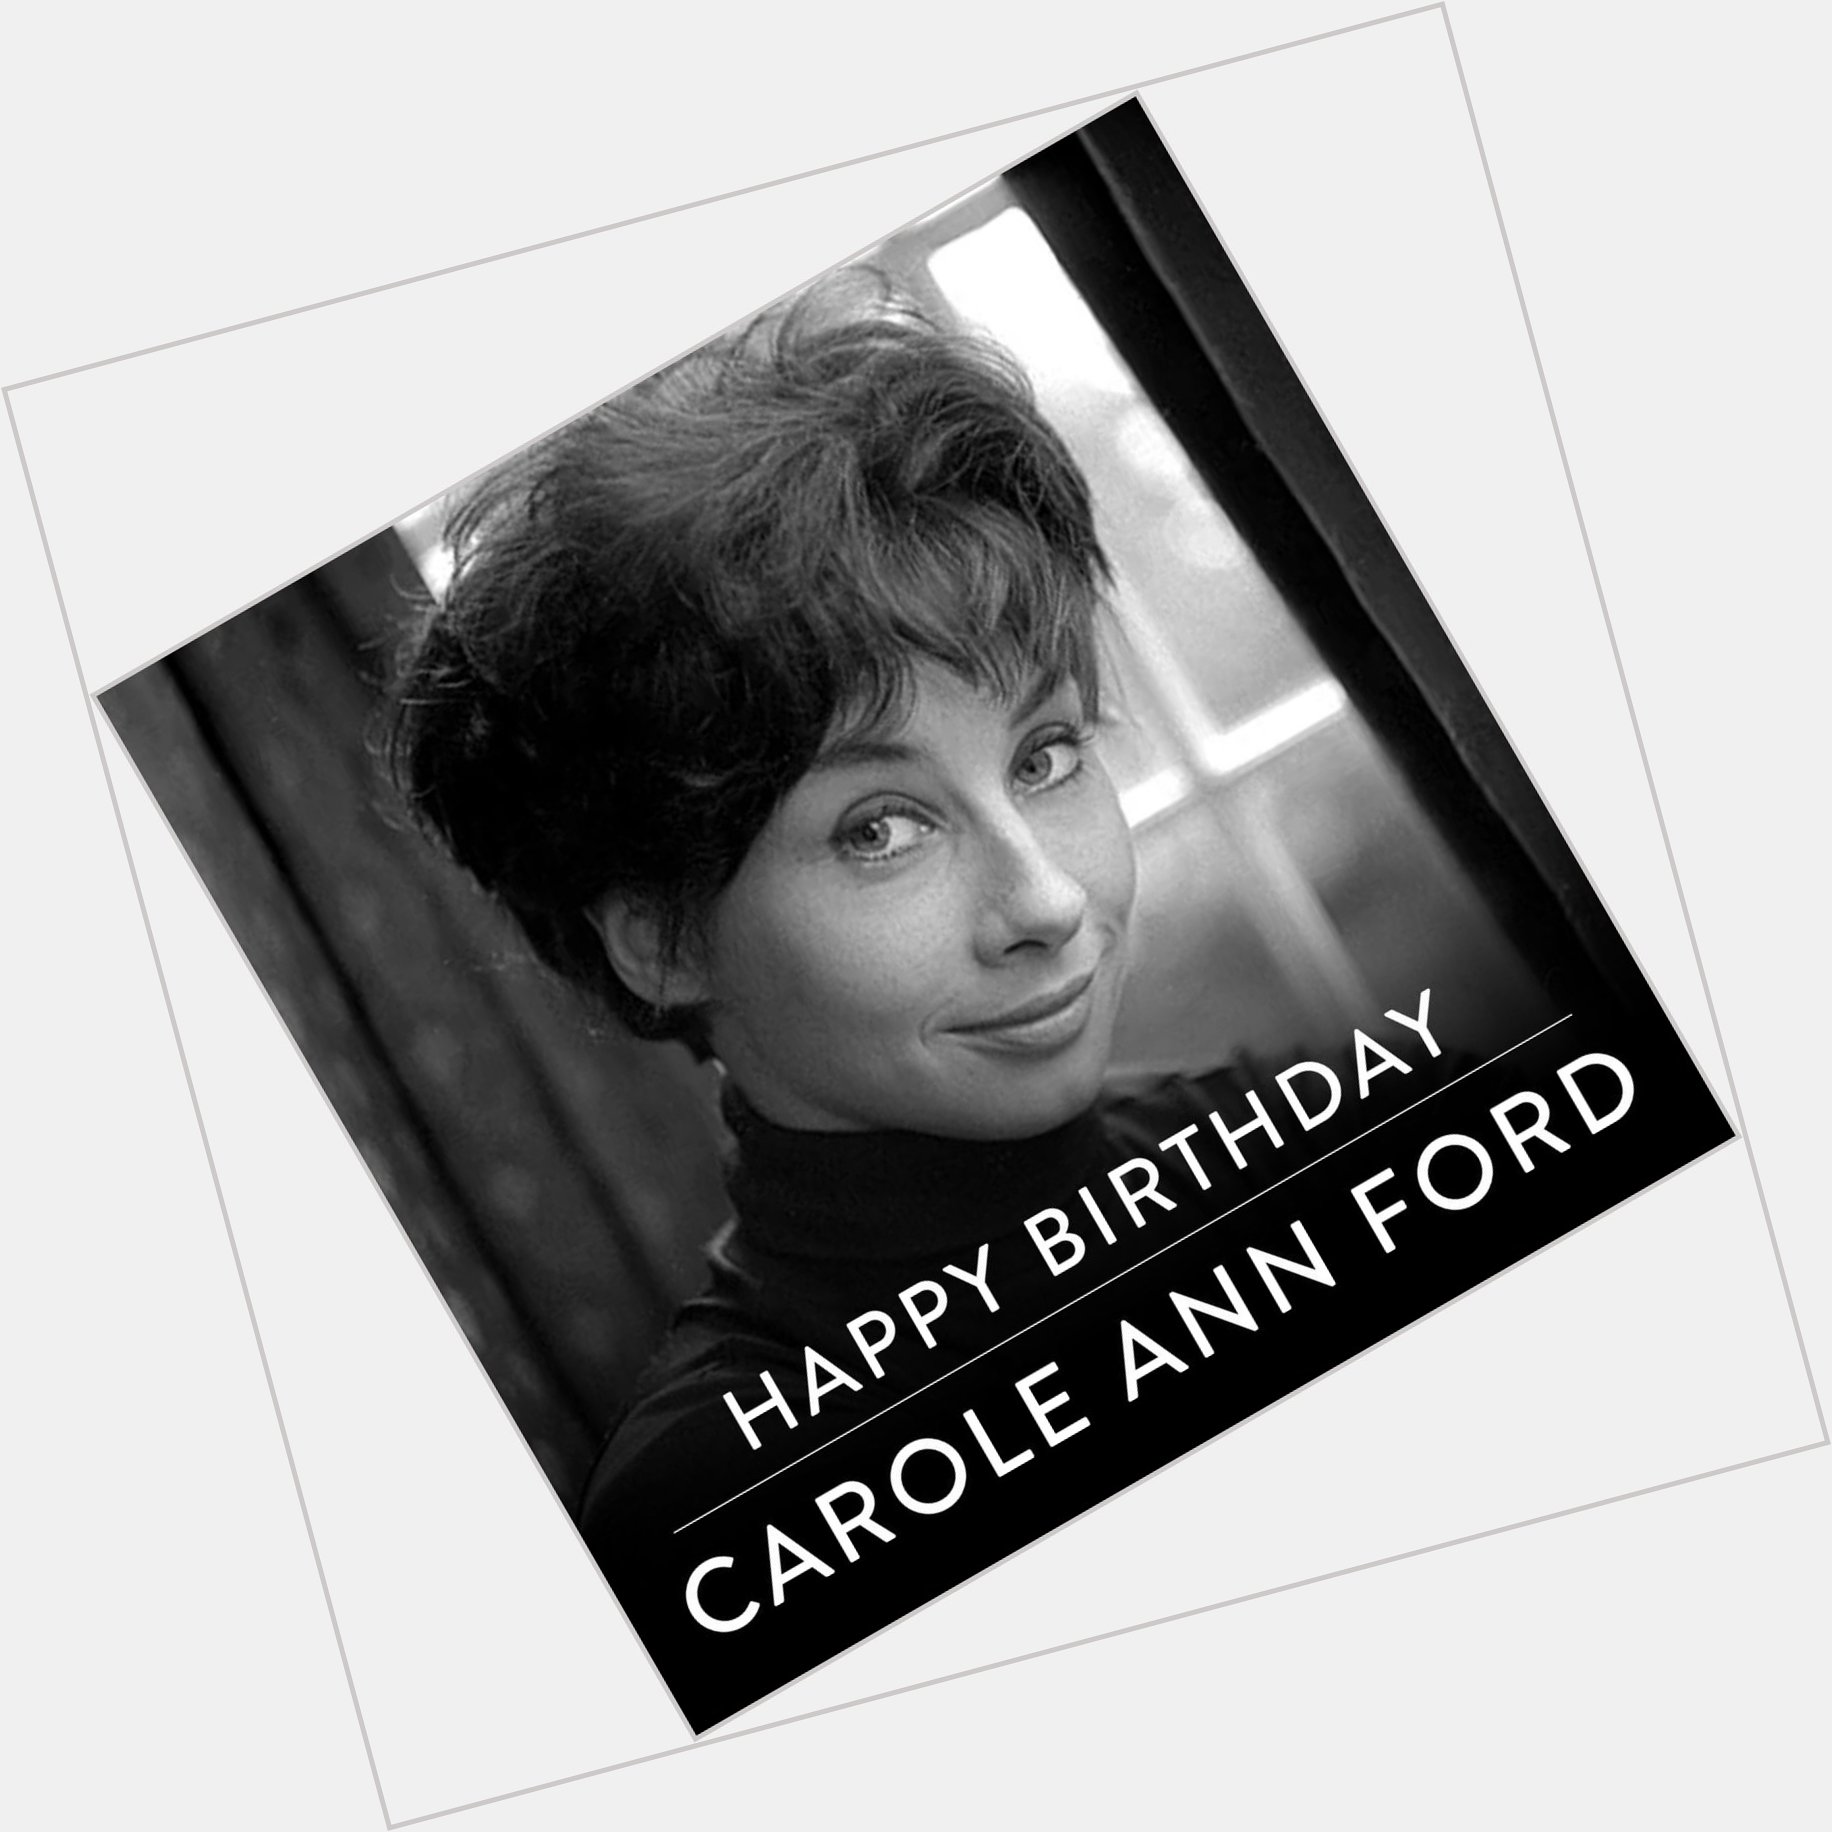 A very Happy Birthday to the first companion - Carole Ann Ford  